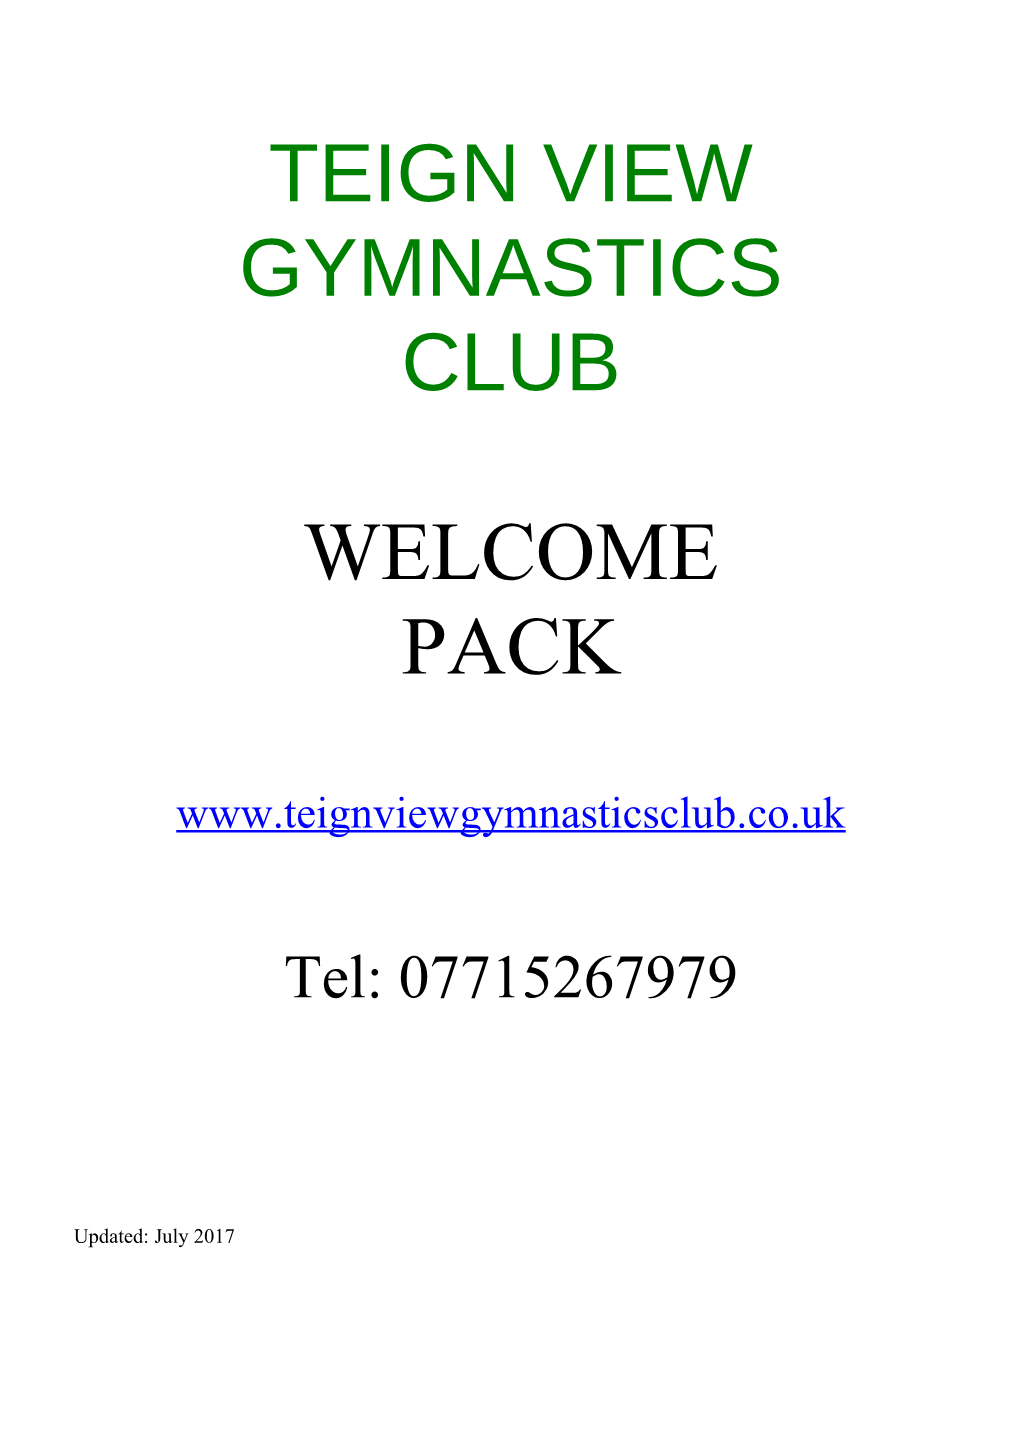 Welcome to Our Gymnastics Club